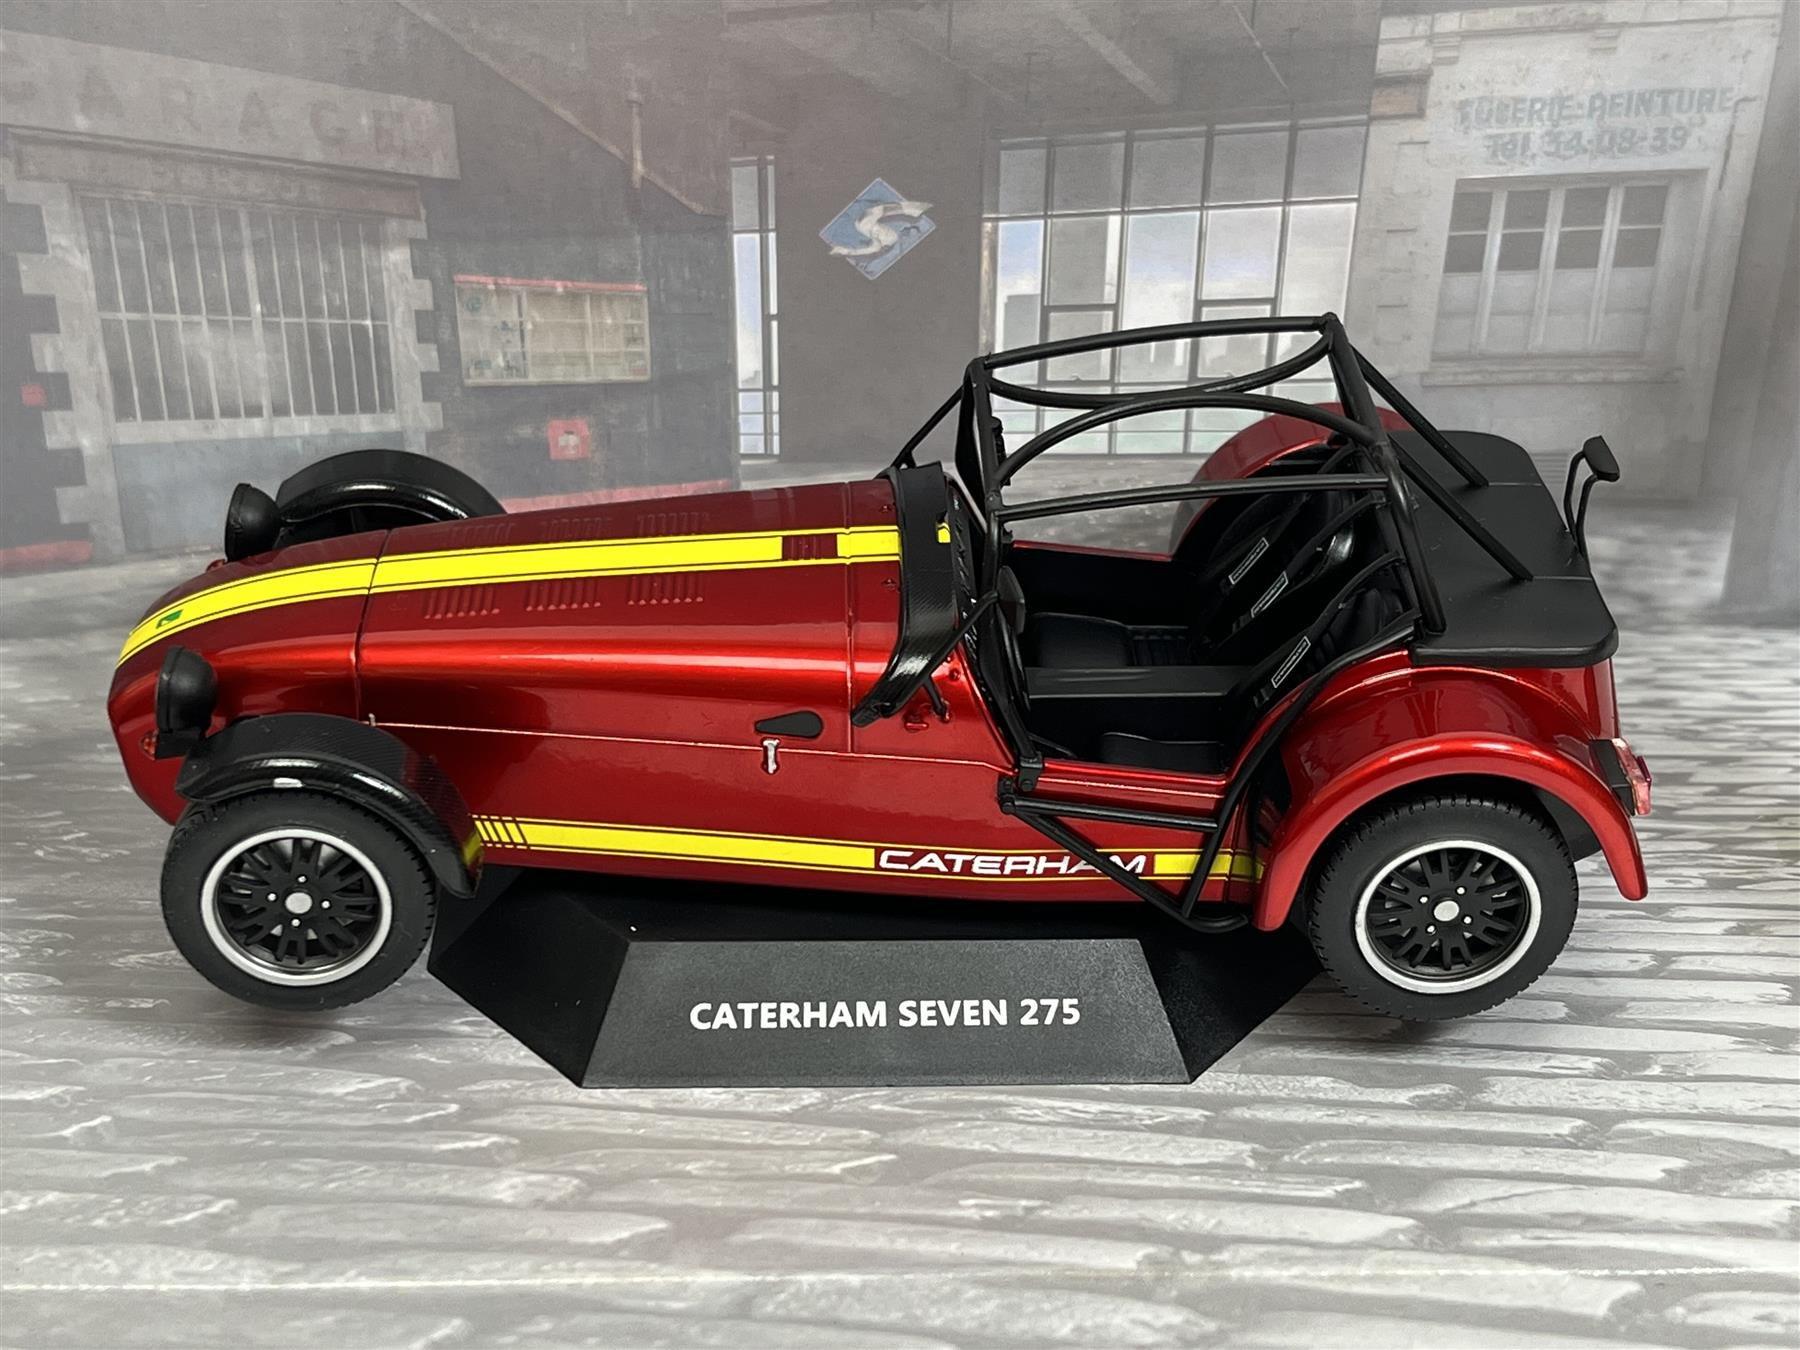 Catheram Seven 275 Academy 2014 Red 1:18 Scale Solido 1801804